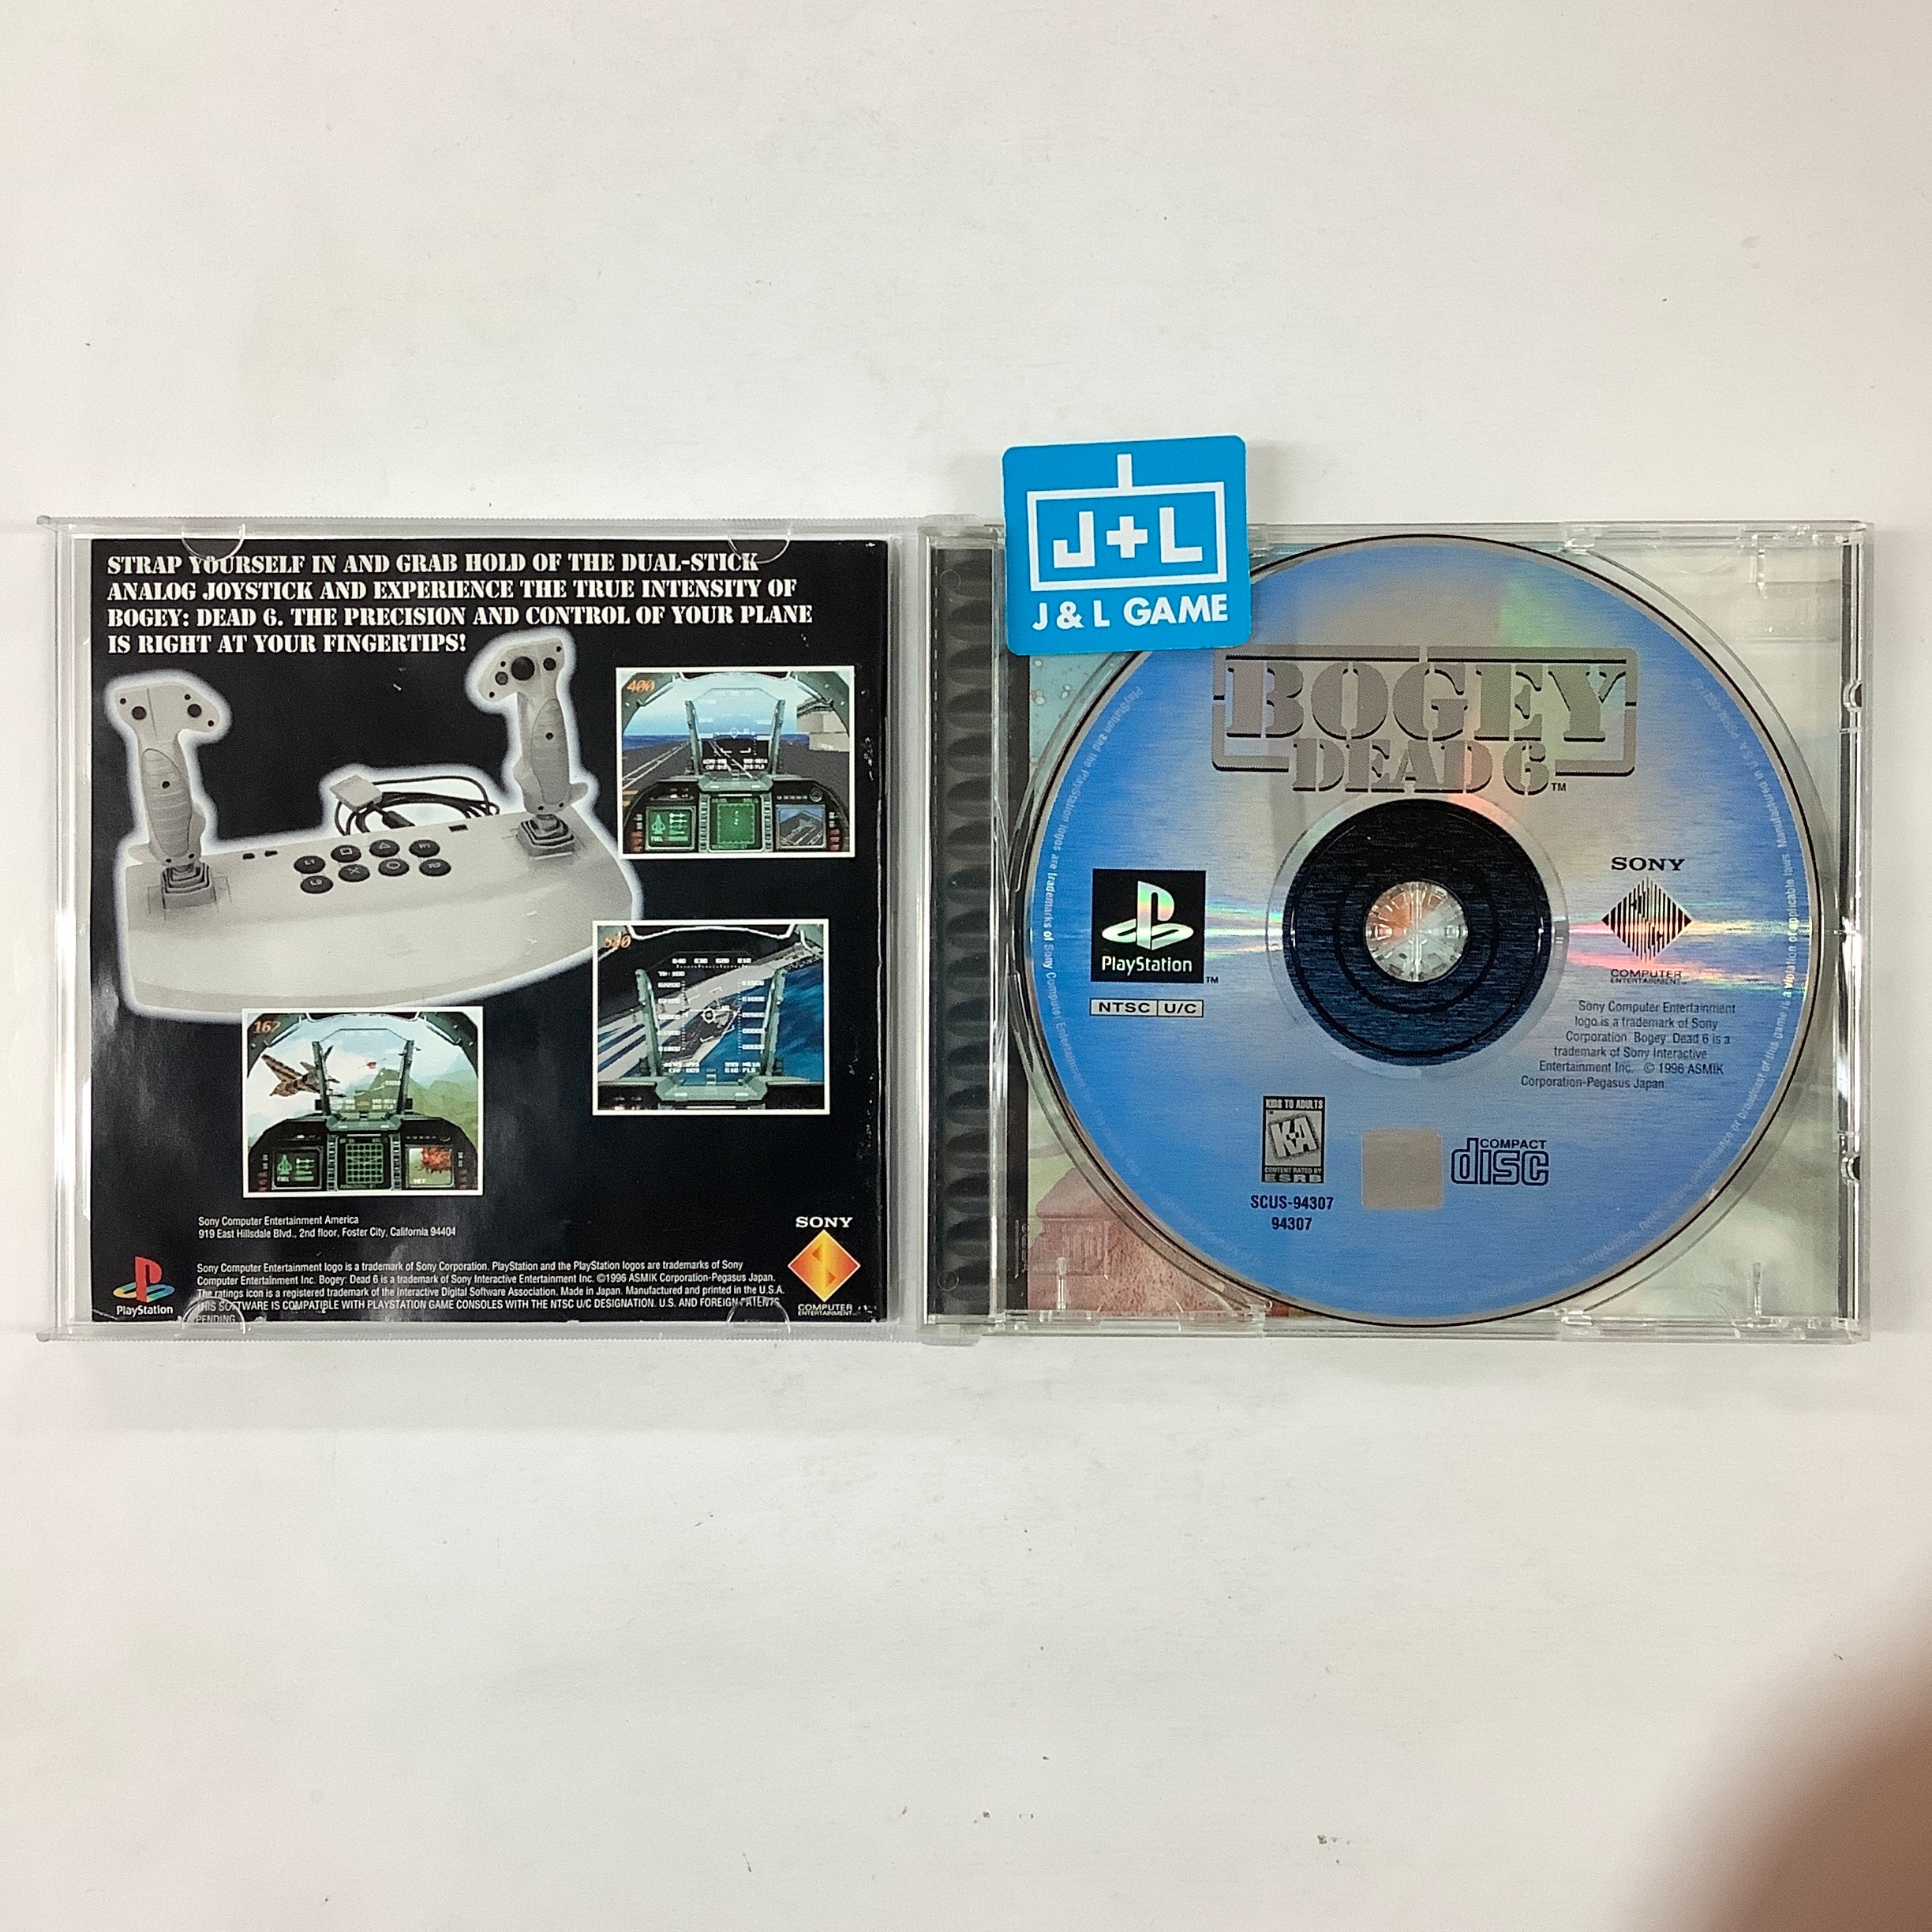 Bogey: Dead 6 - (PS1) PlayStation 1 [Pre-Owned] Video Games SCEA   